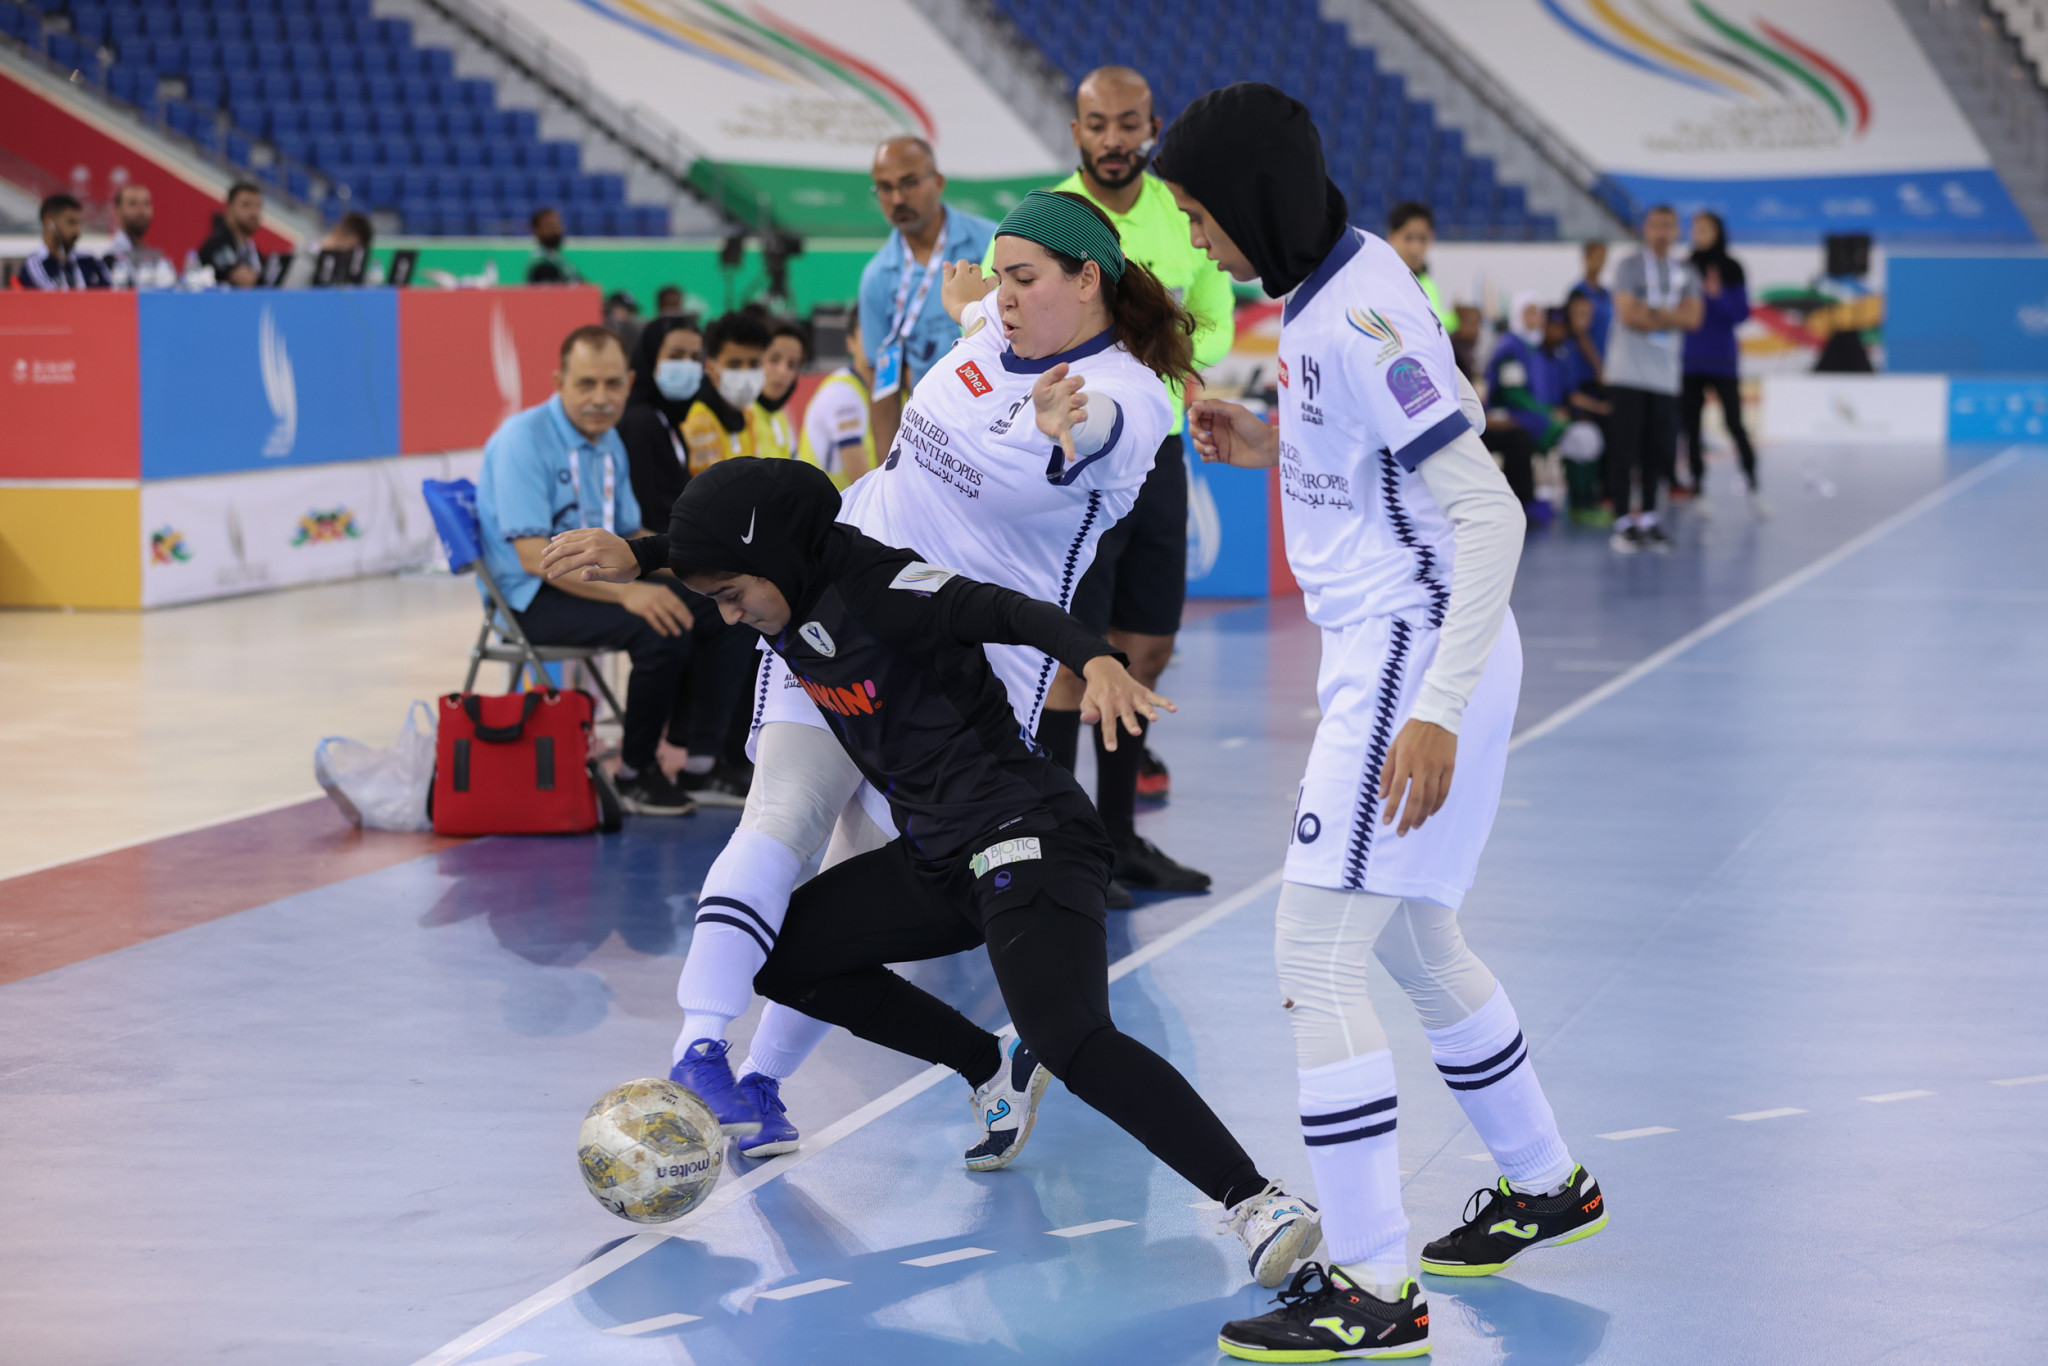 Magic touch earns Al-Hilal women's futsal victory in overtime at Saudi Games